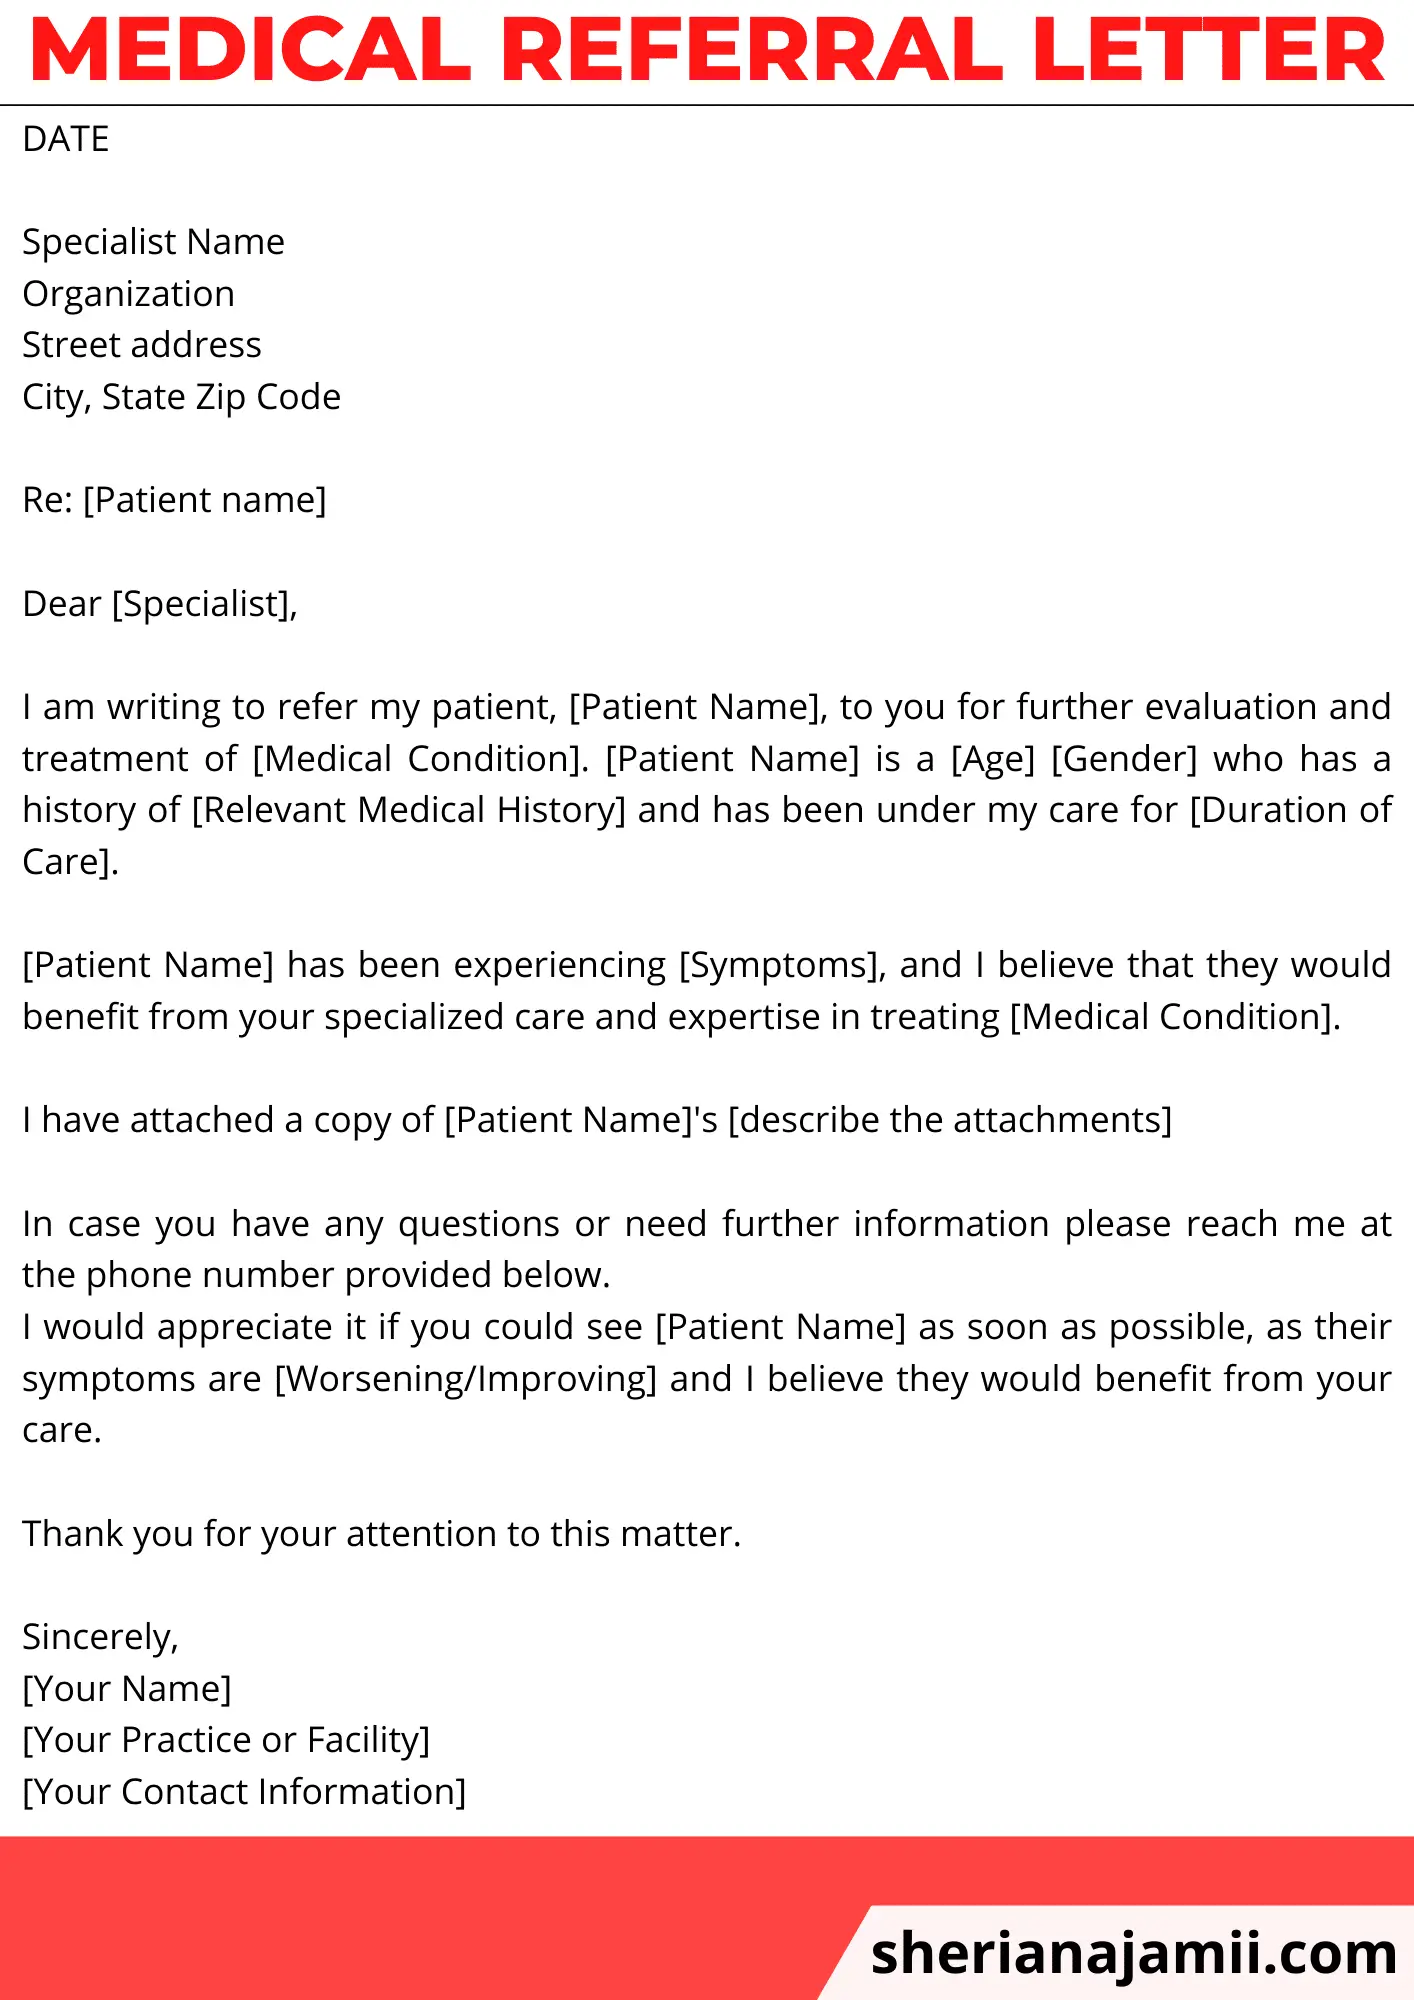 Medical referral letter, Medical referral letter template, Medical referral letter sample, Medical referral letter example, sample referral letter from doctor to specialist, example referral letter to specialist,